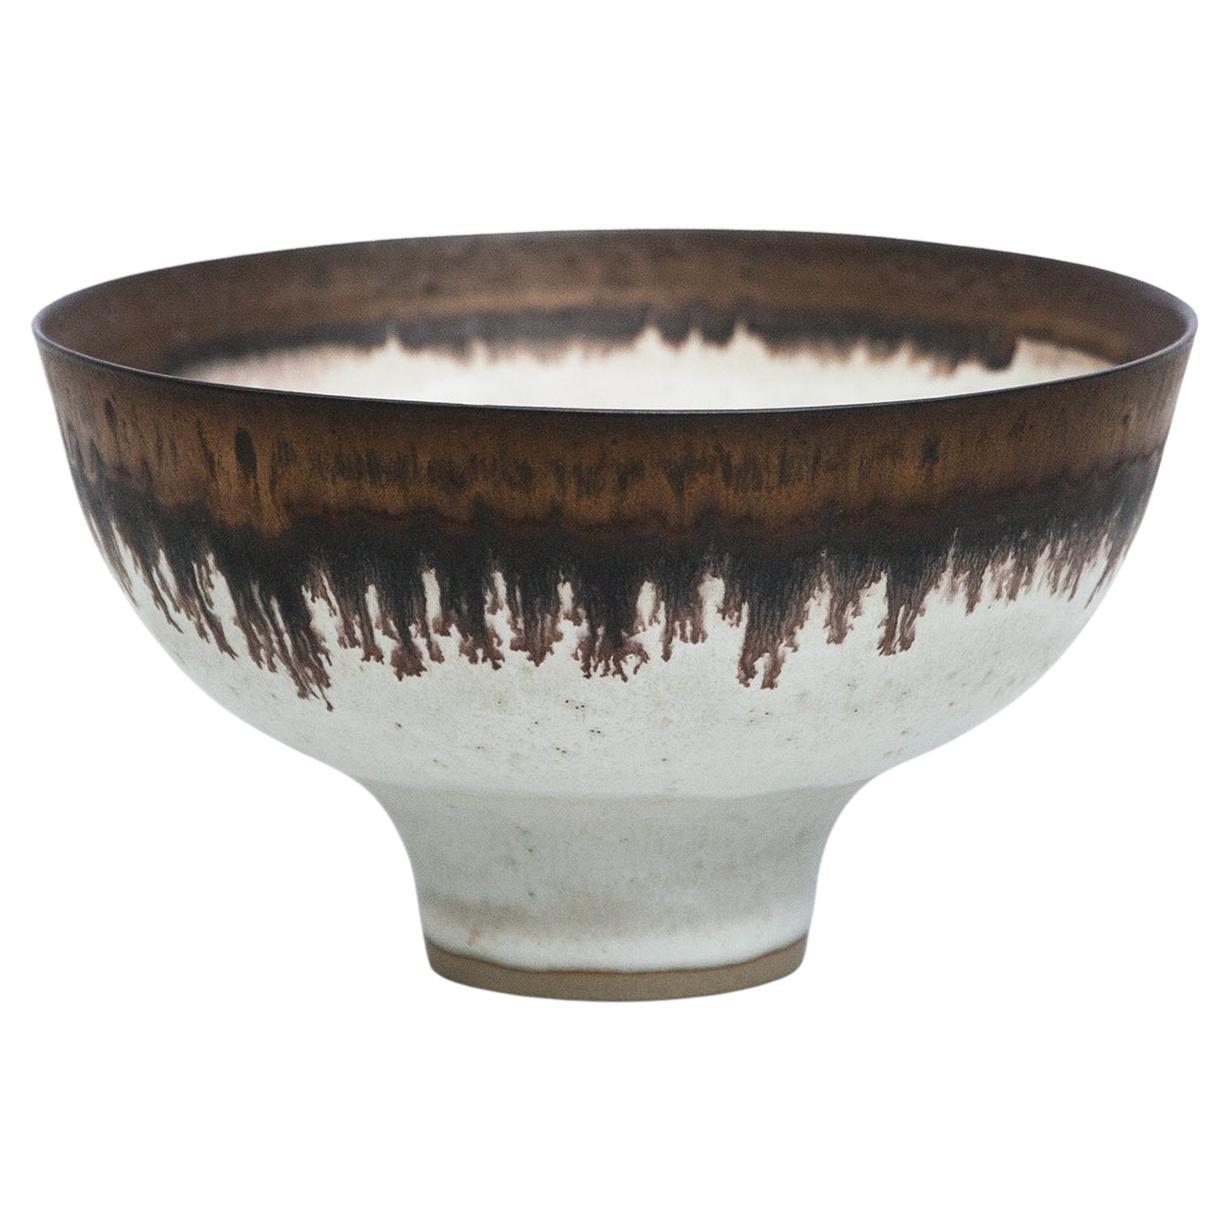 Lucie Rie Manganeze Rim Bowl 1980 For Sale